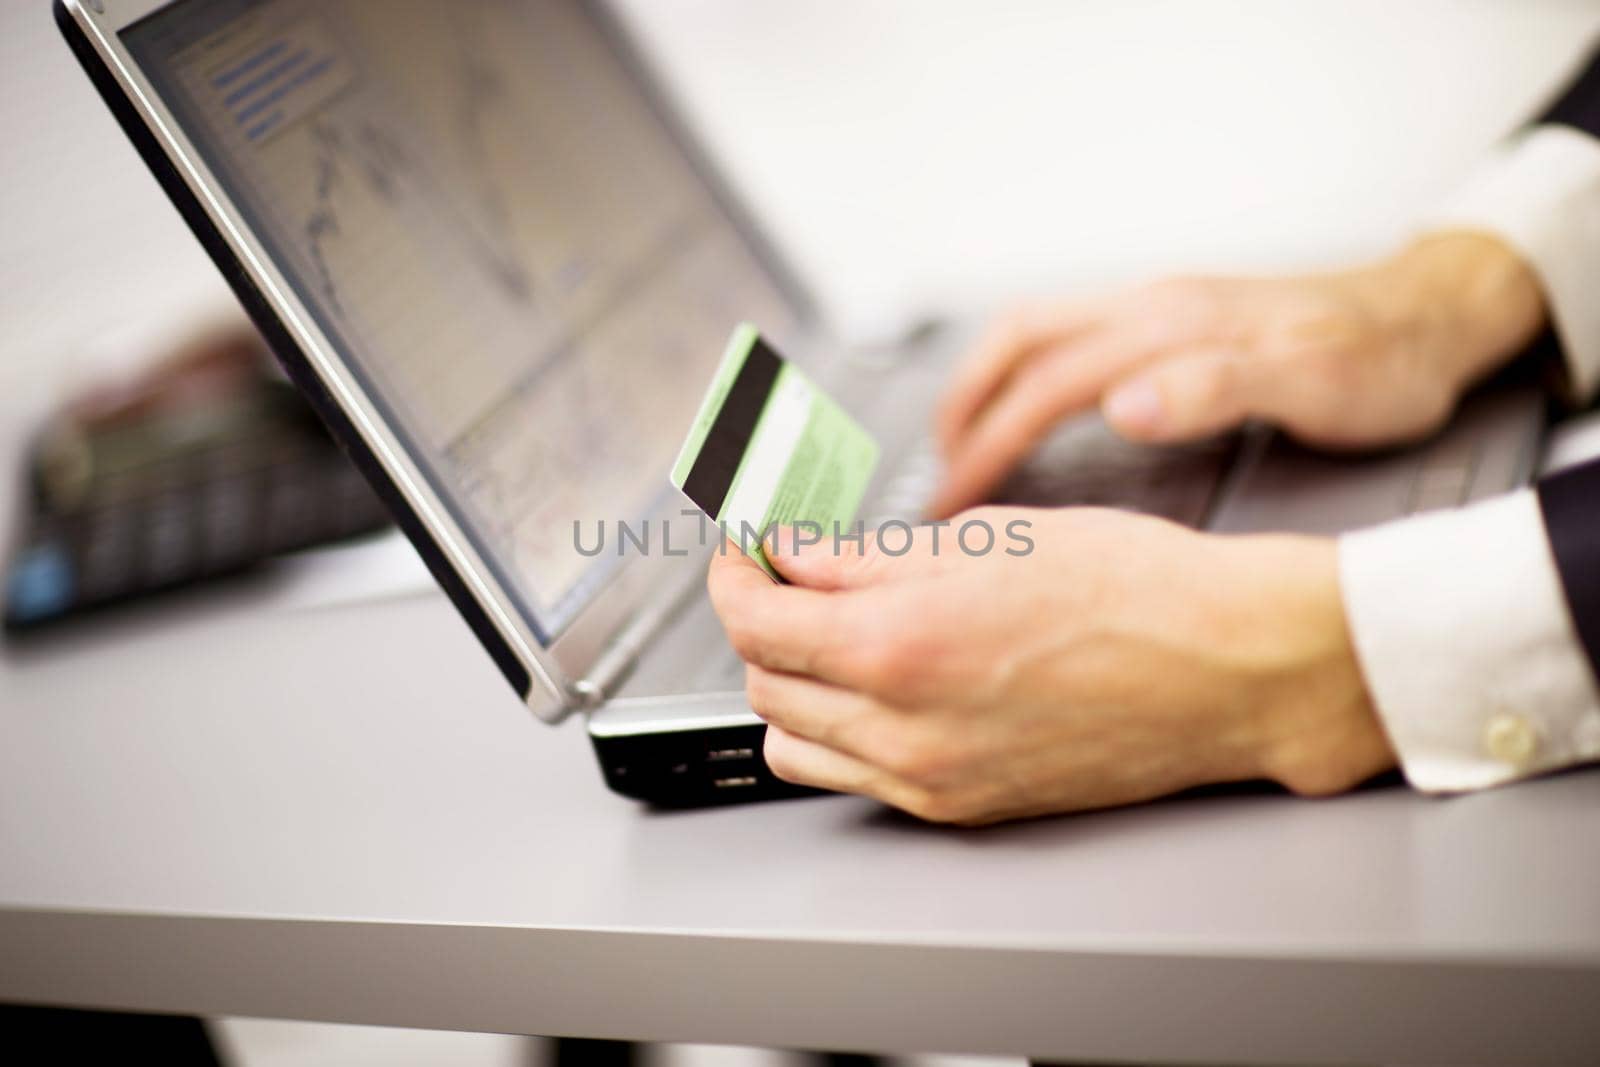 Young businessman holding a credit card and typing. On-line shopping on the internet using a laptop